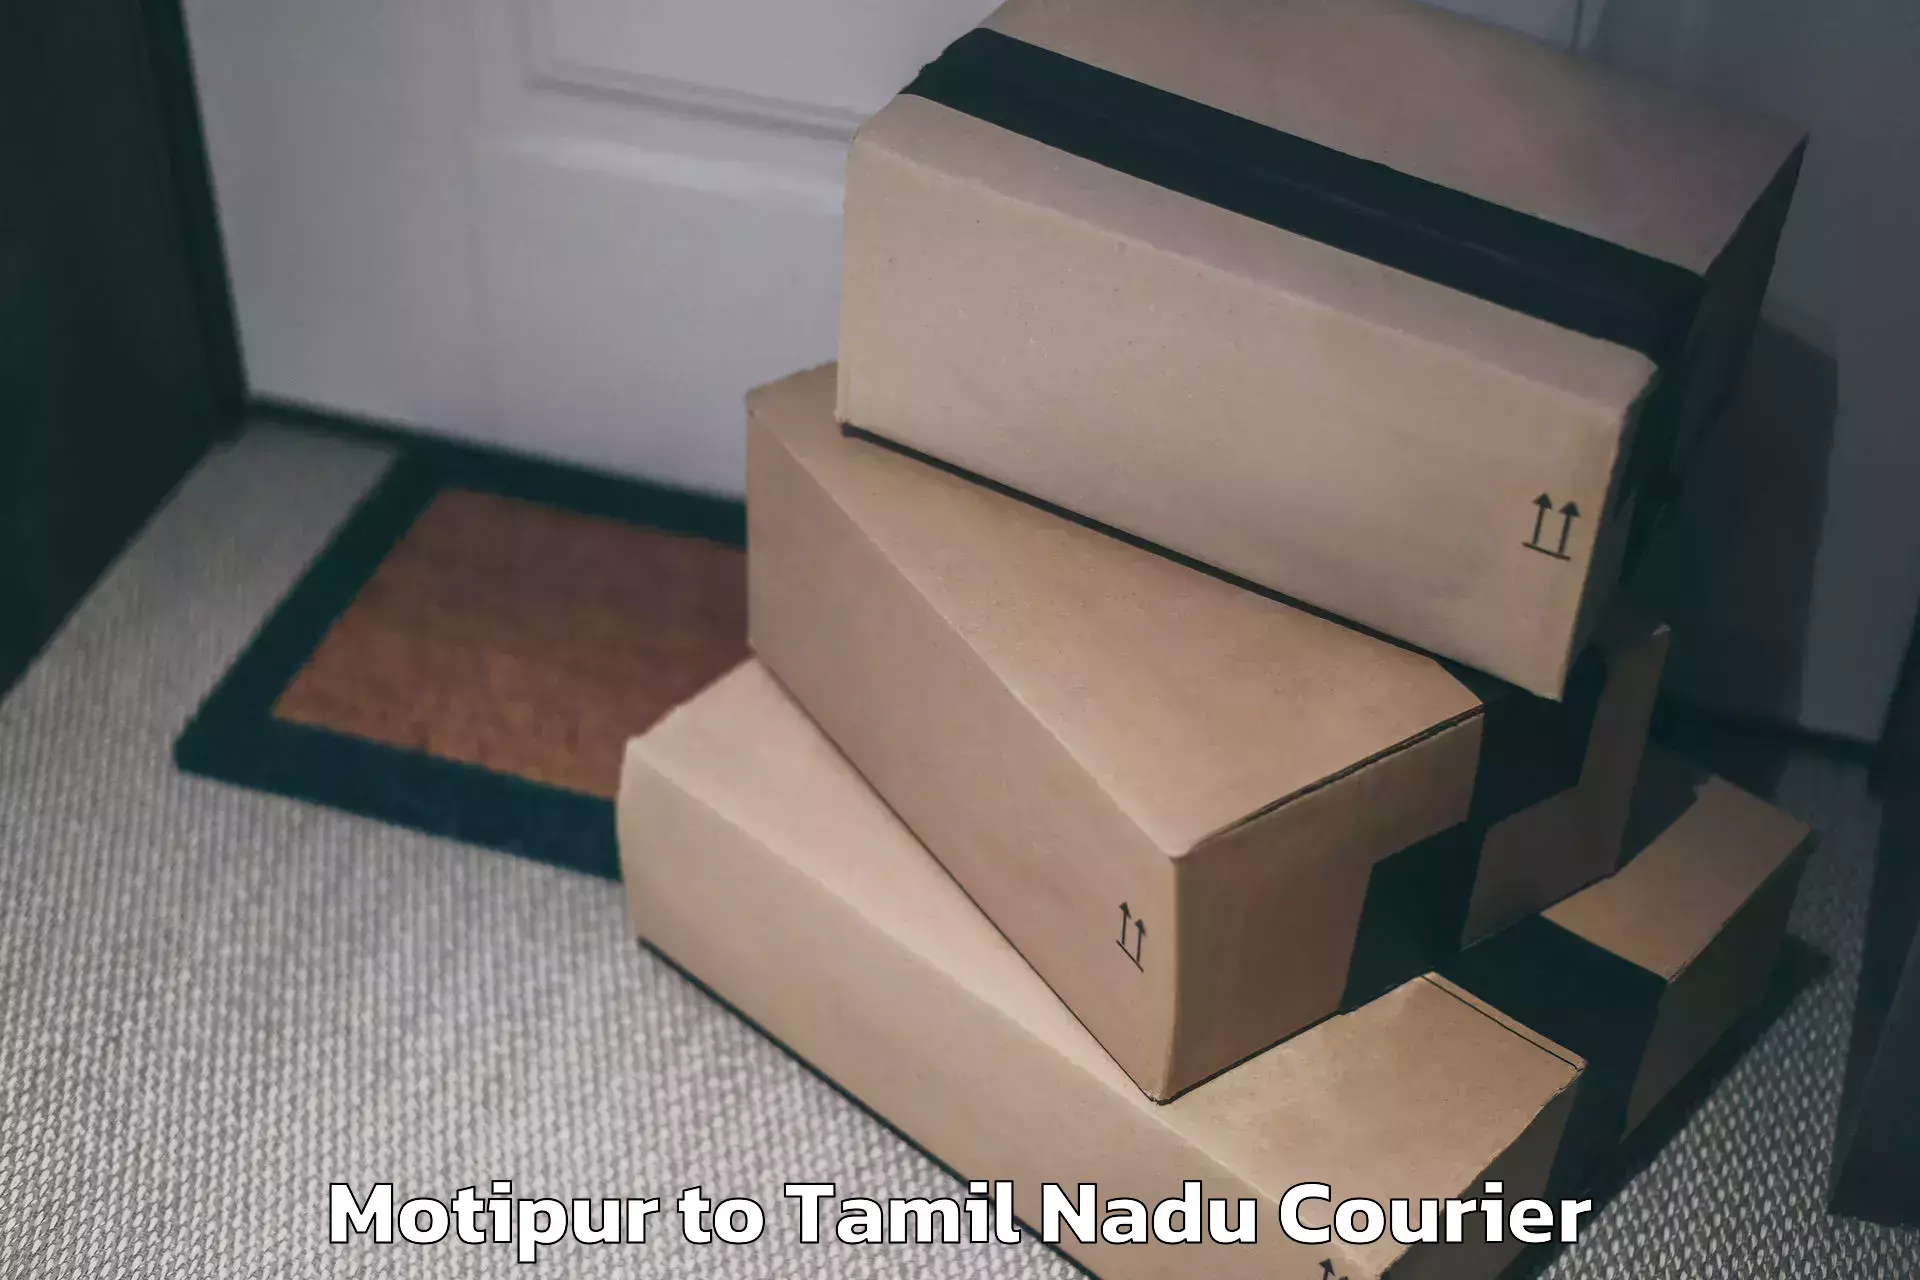 Luggage delivery network Motipur to Tamil Nadu